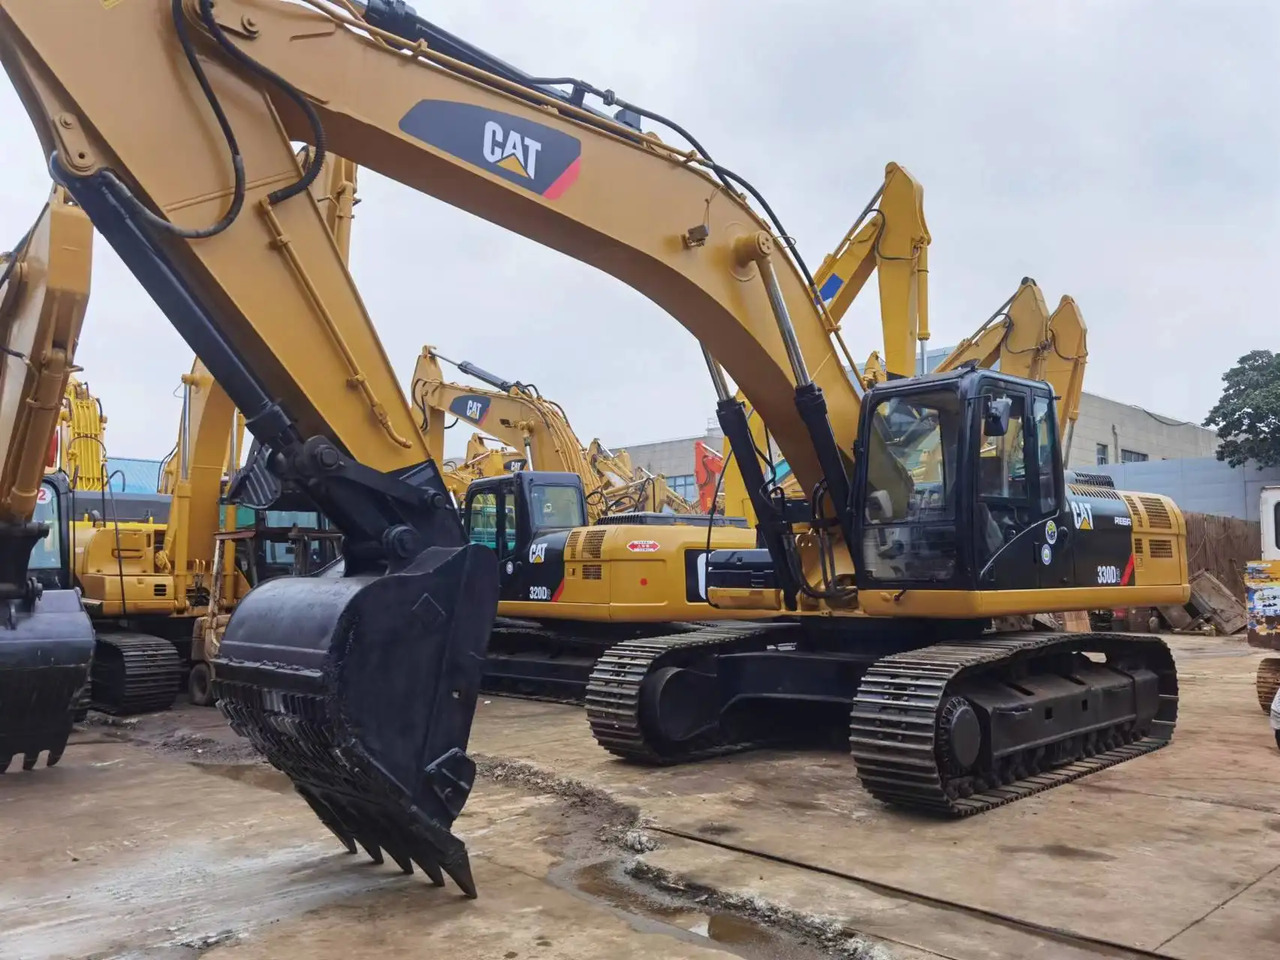 Kettenbagger Used CAT 330DL Excavator CAT 330DL made in Japan in good Working Condition in stock on sale: das Bild 4